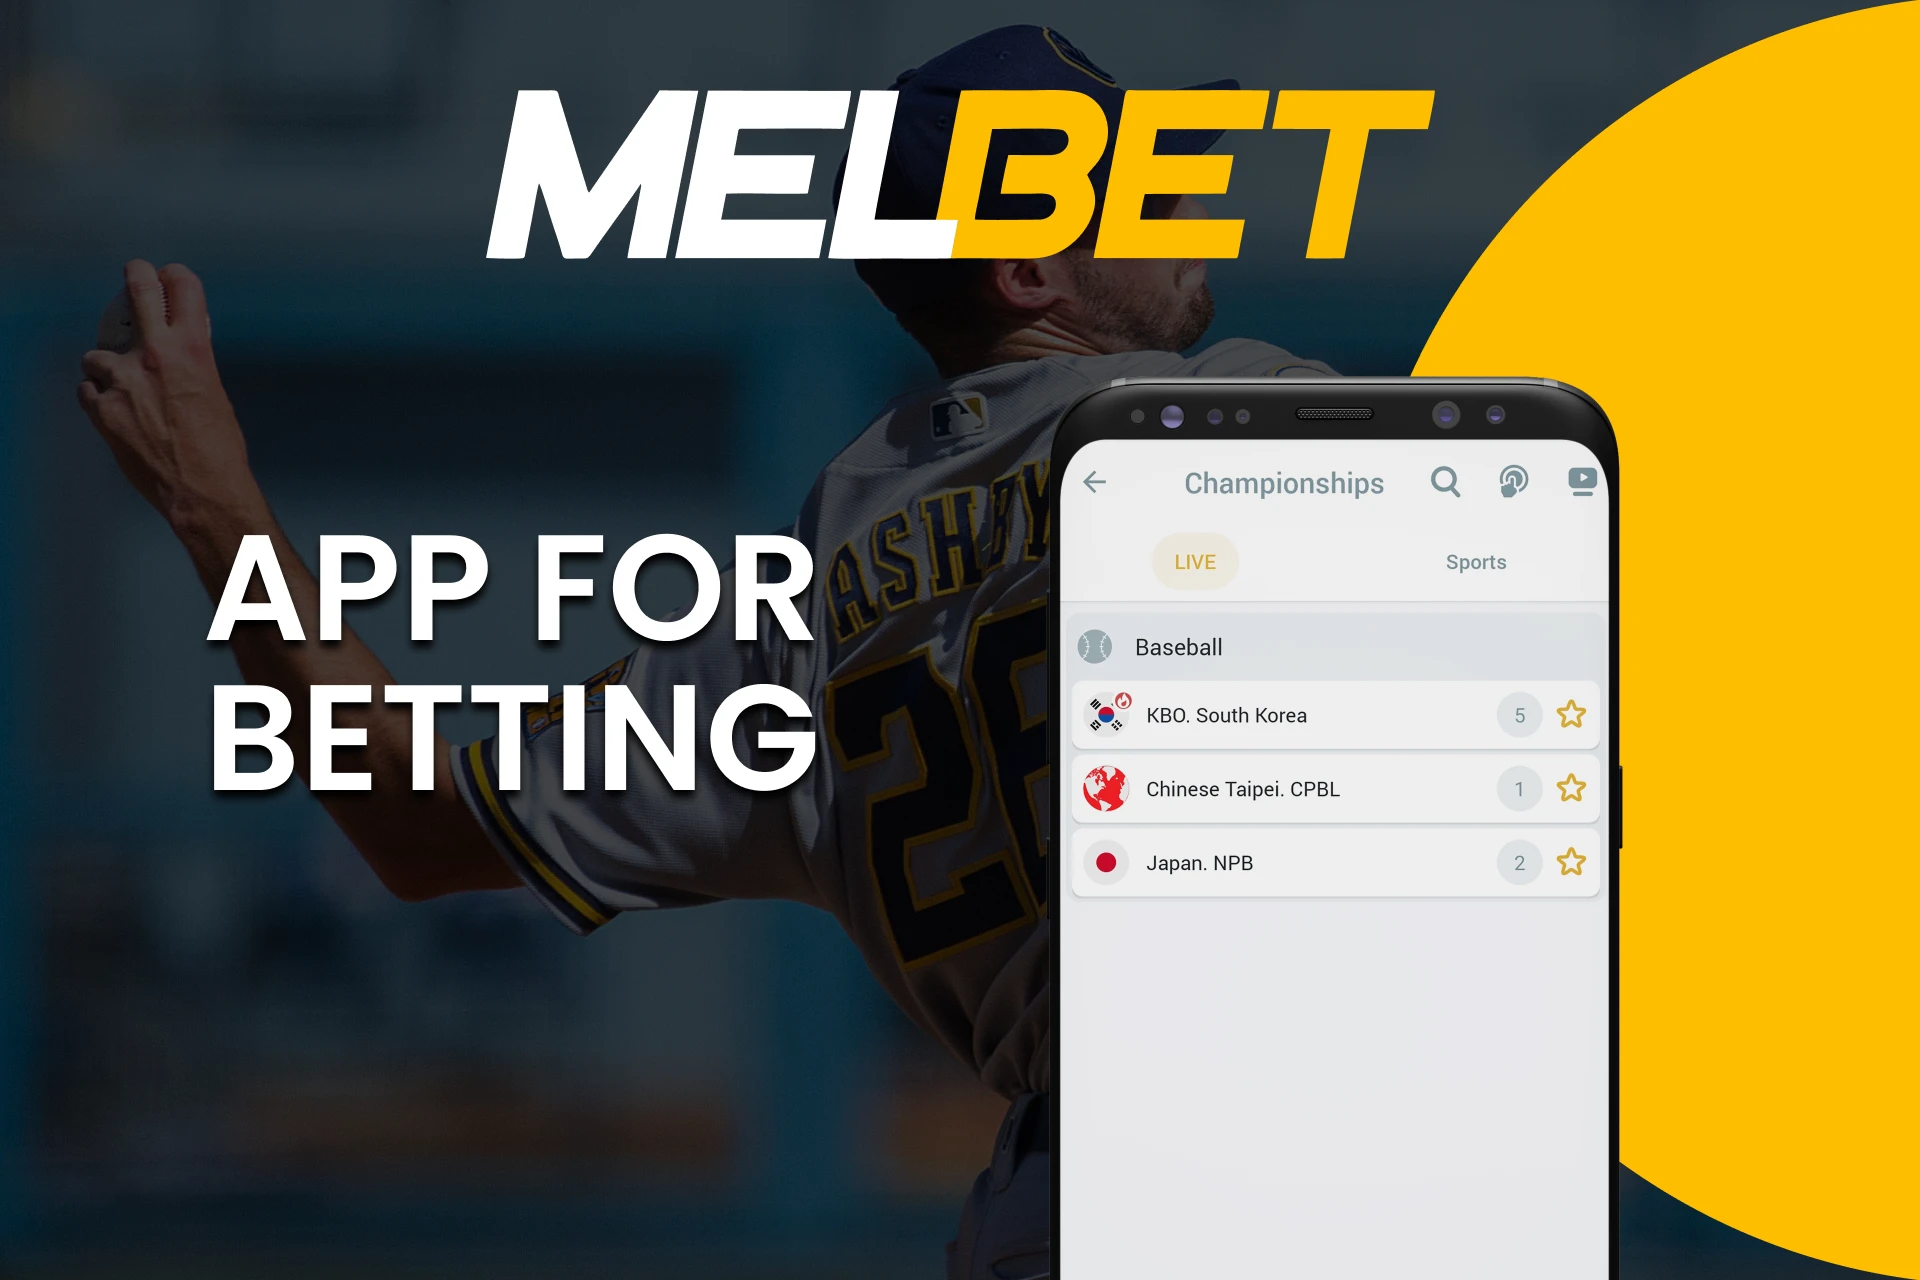 Download the Melbet app for baseball betting.